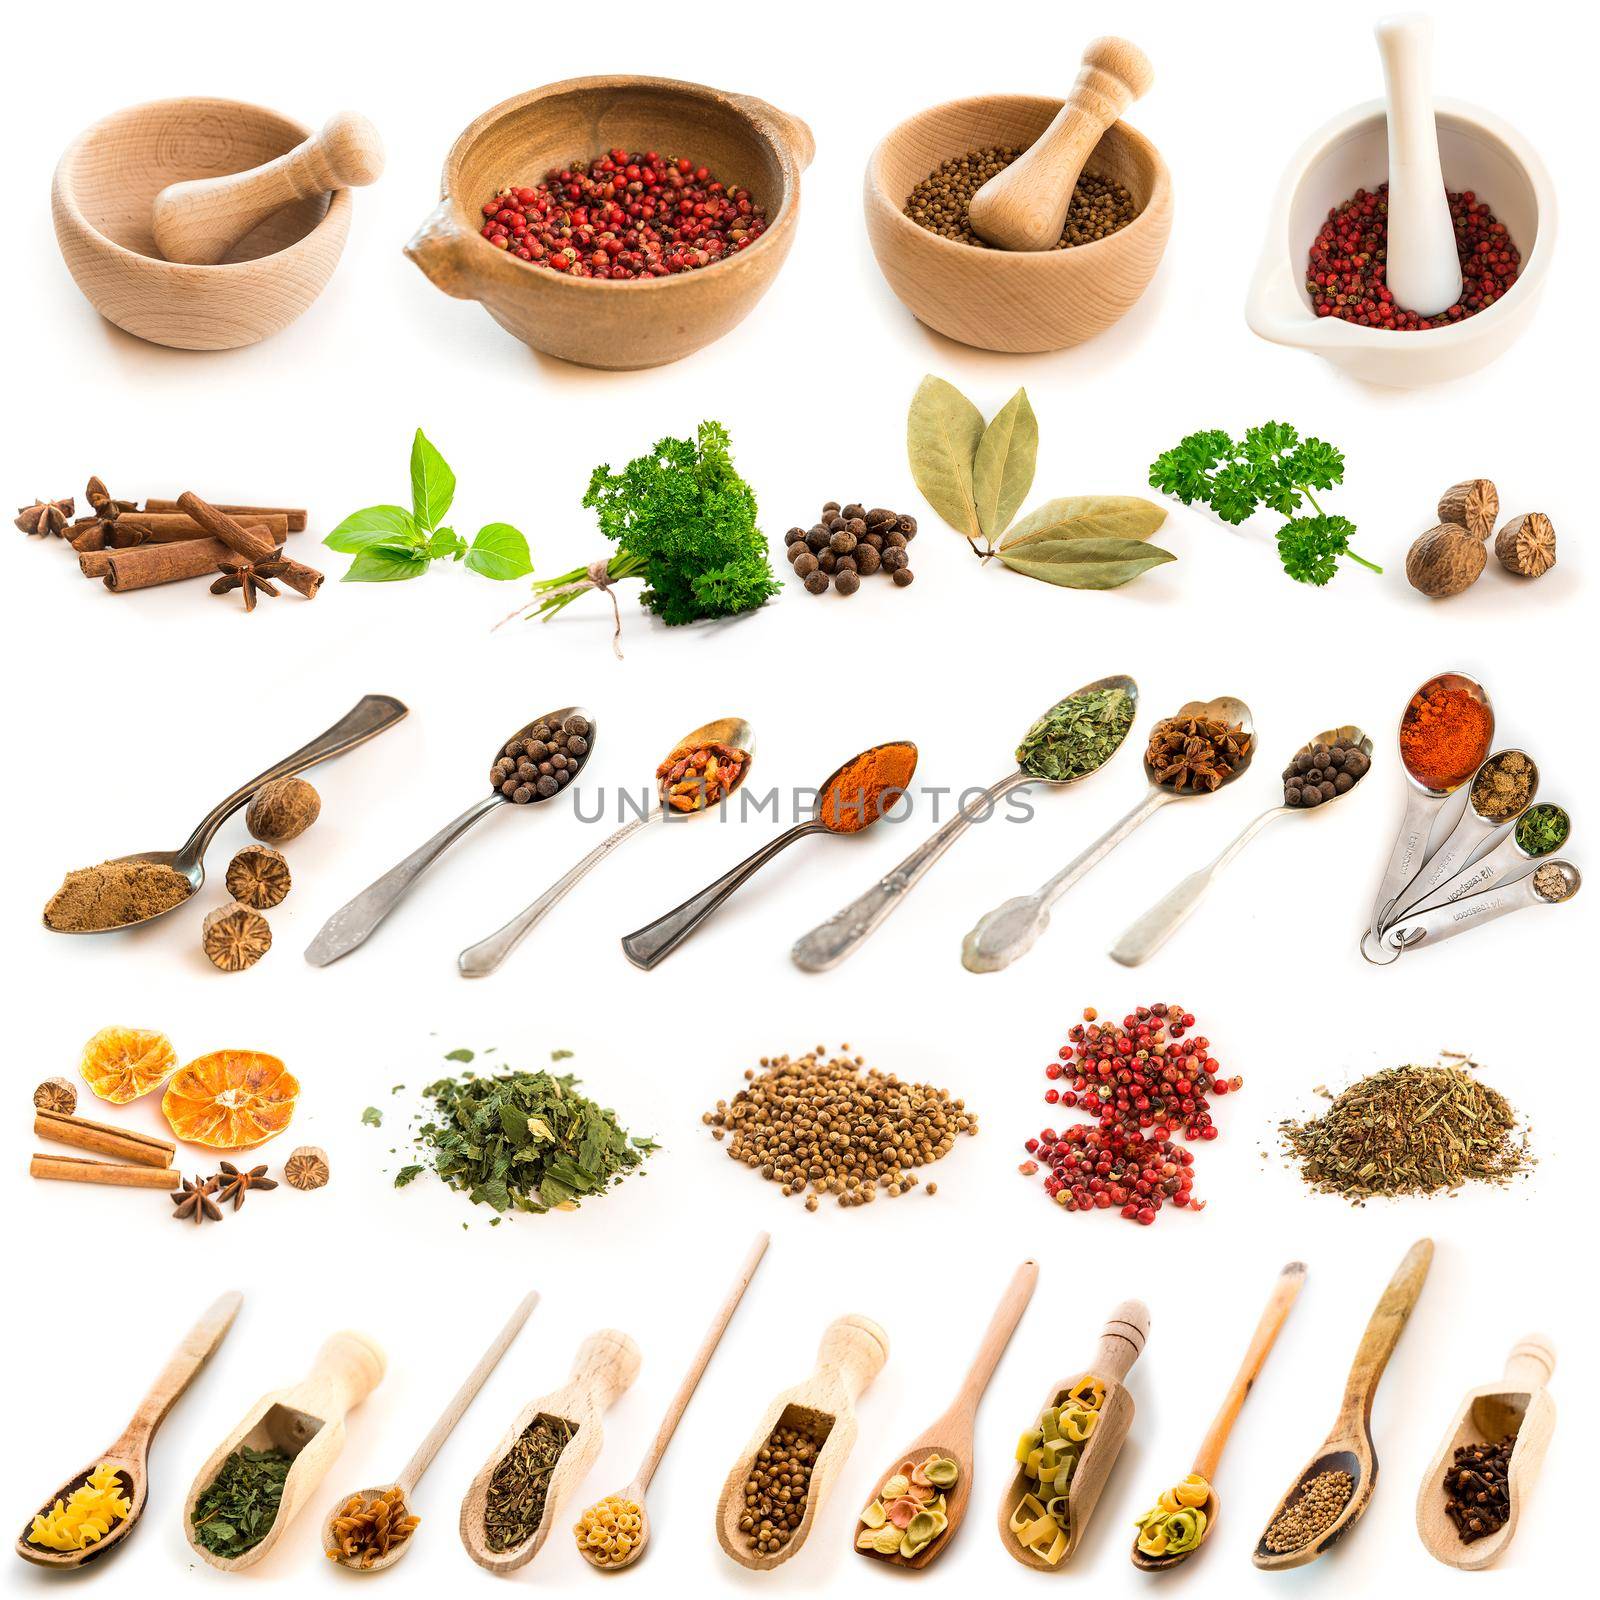 Collage of photos of different spices by tan4ikk1